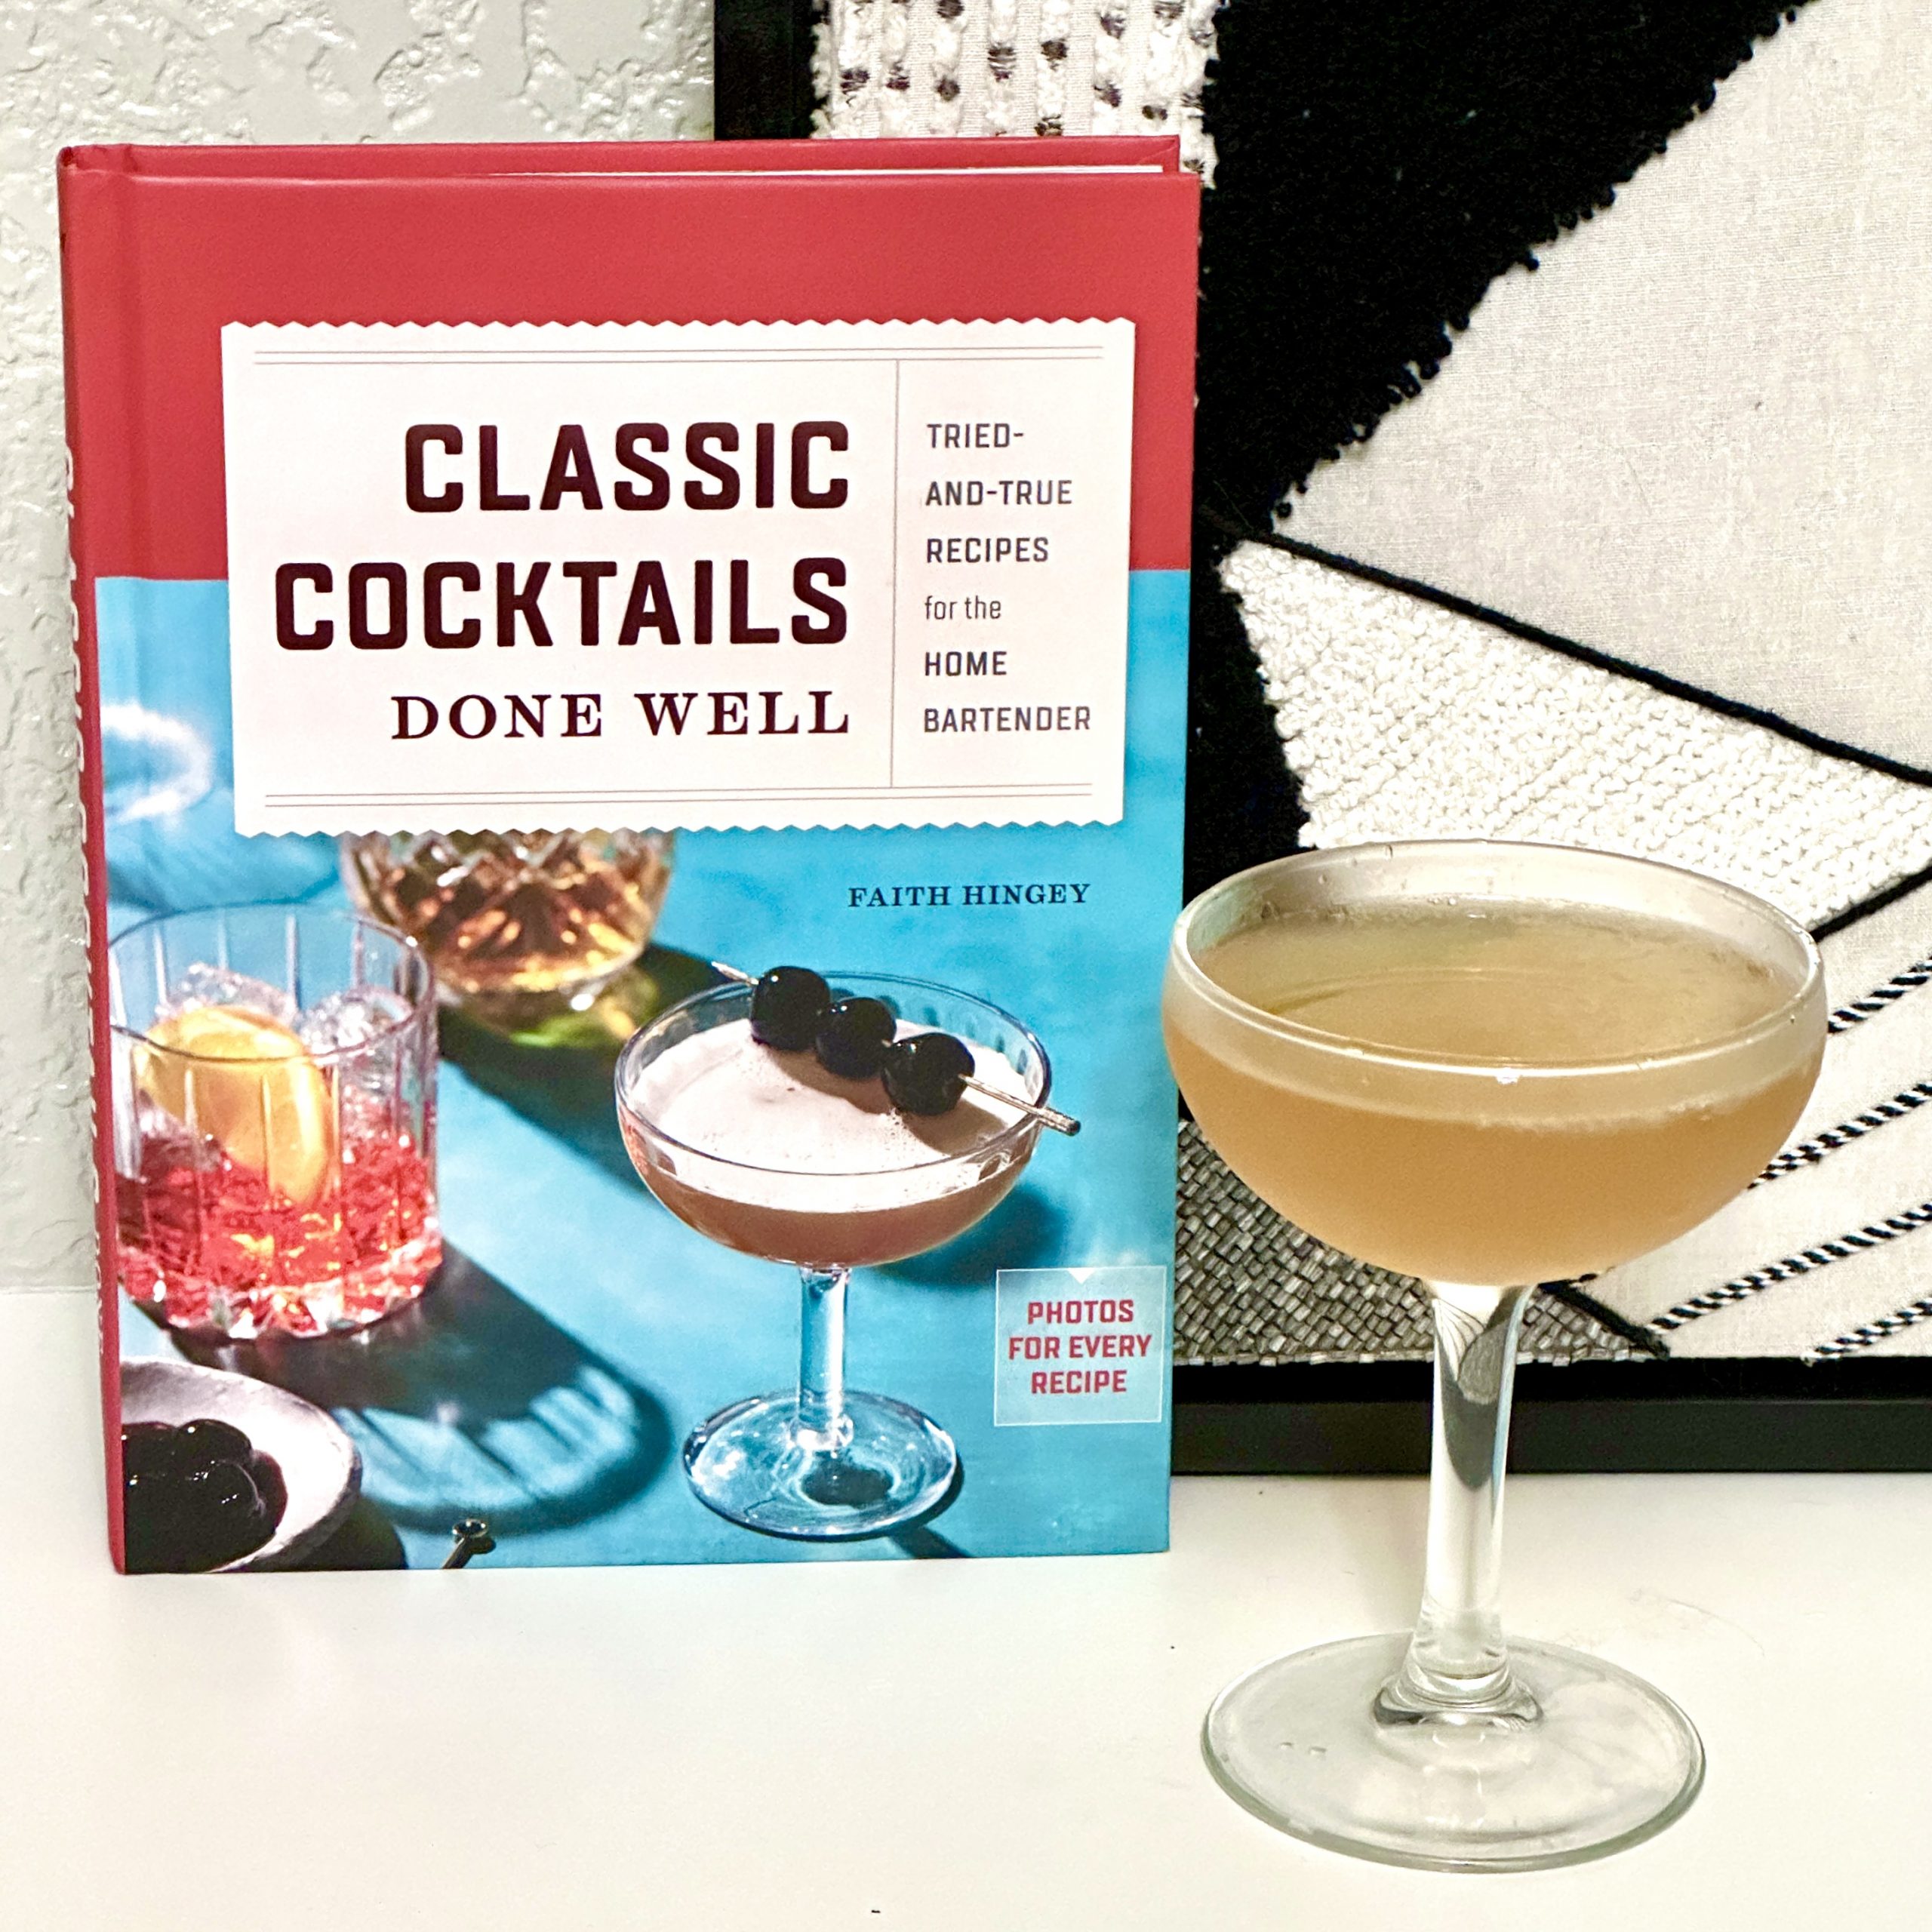 Ready Or Not is Everything, & That's Not A Good Thing – Critic's Cocktail